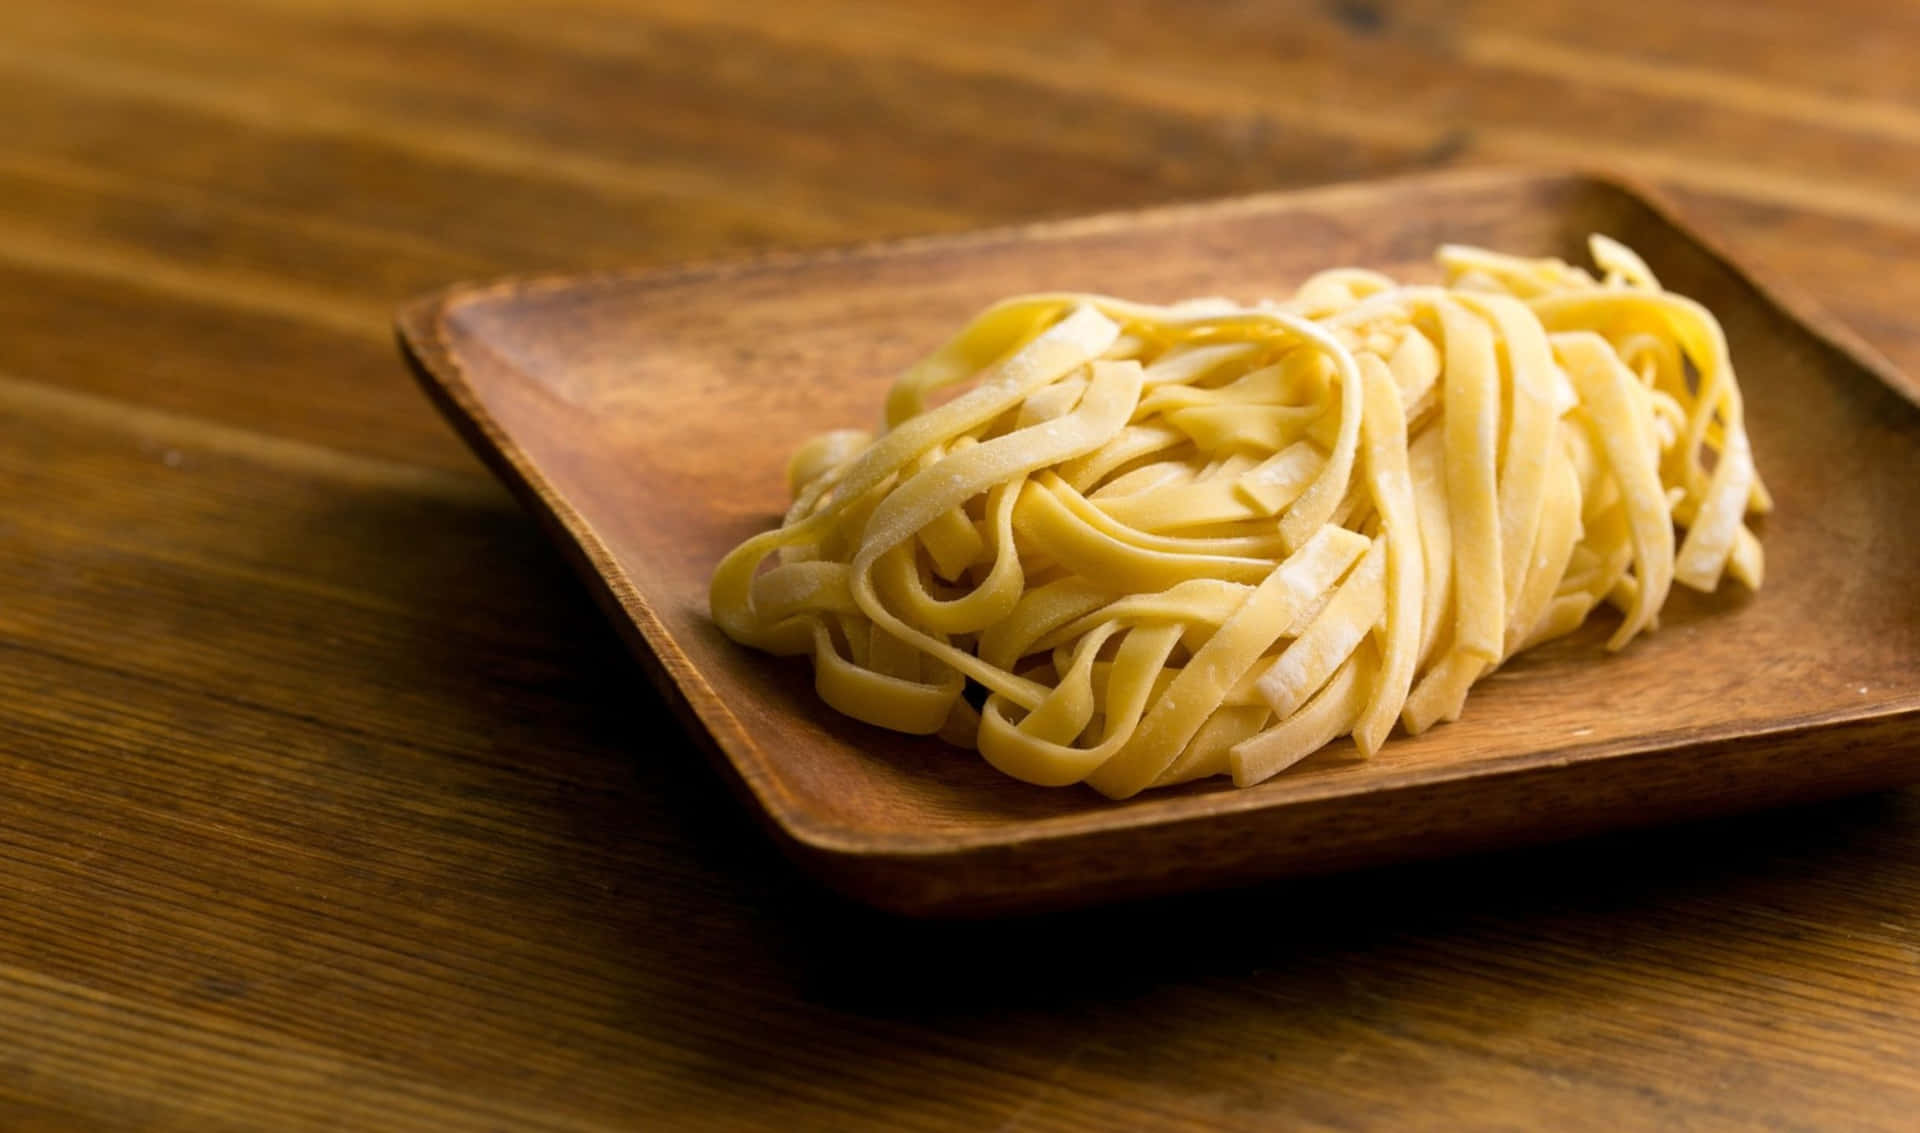 A Plate Of Pasta On A Wooden Table